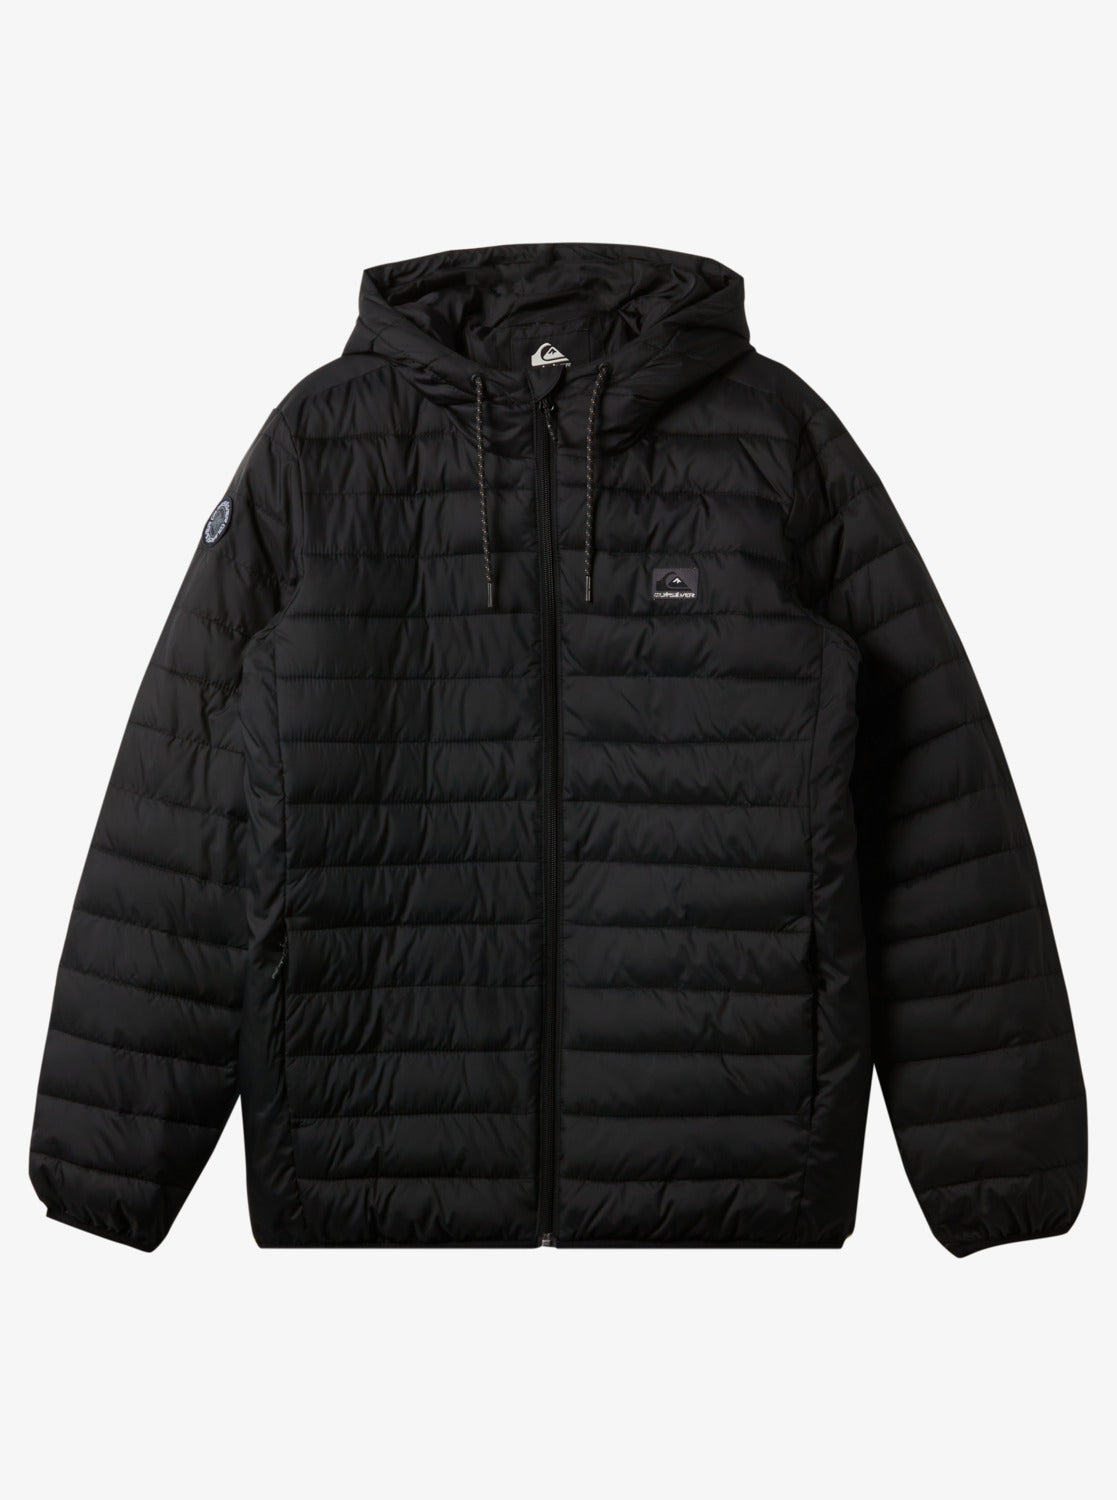 Quiksilver Scaly Hooded Puffer Jacket in black